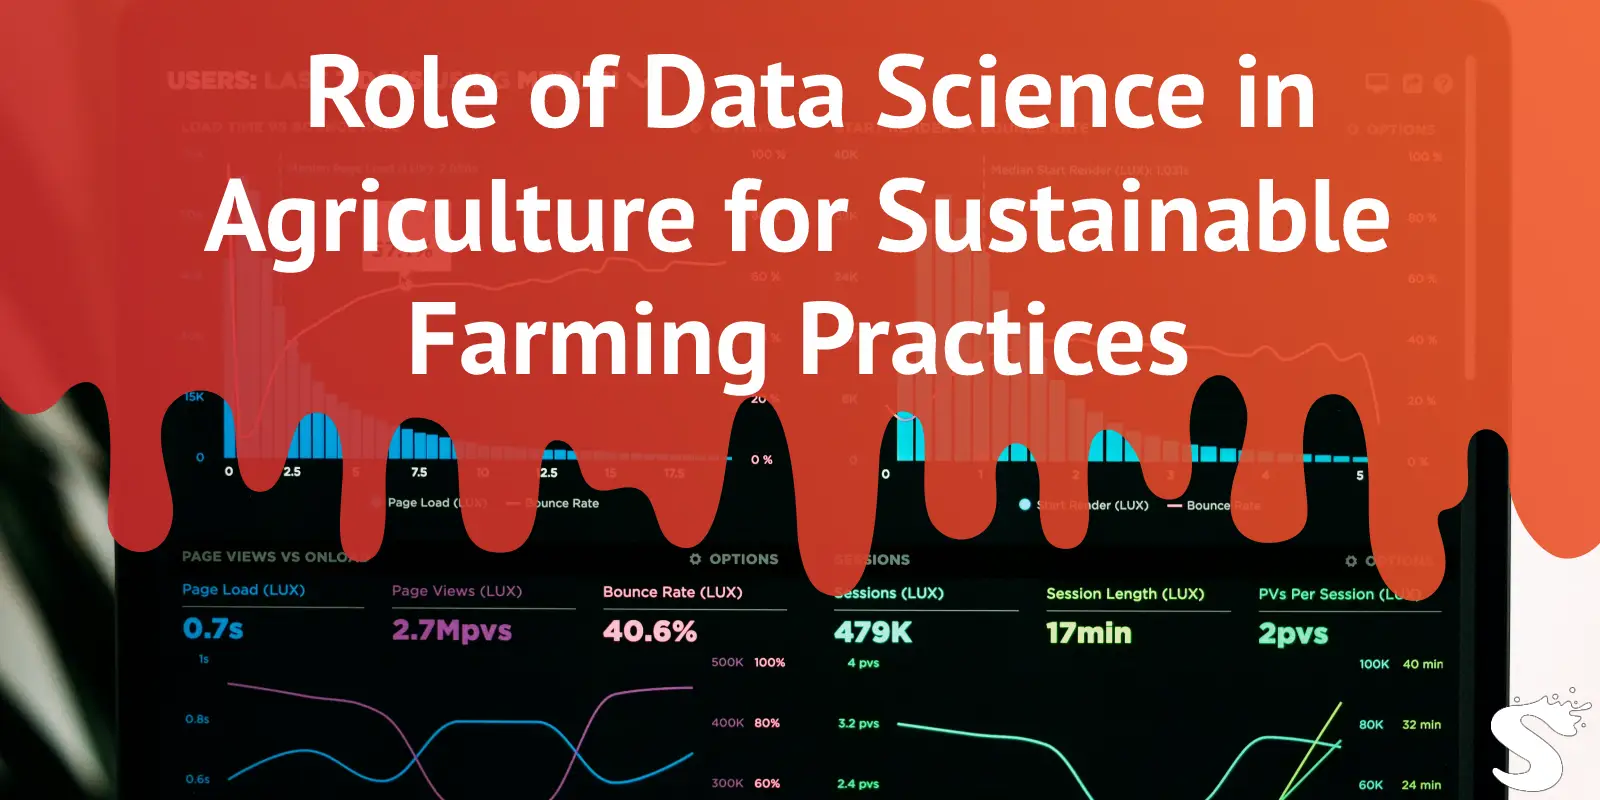 Role of Data Science in Agriculture for Sustainable Farming Practices